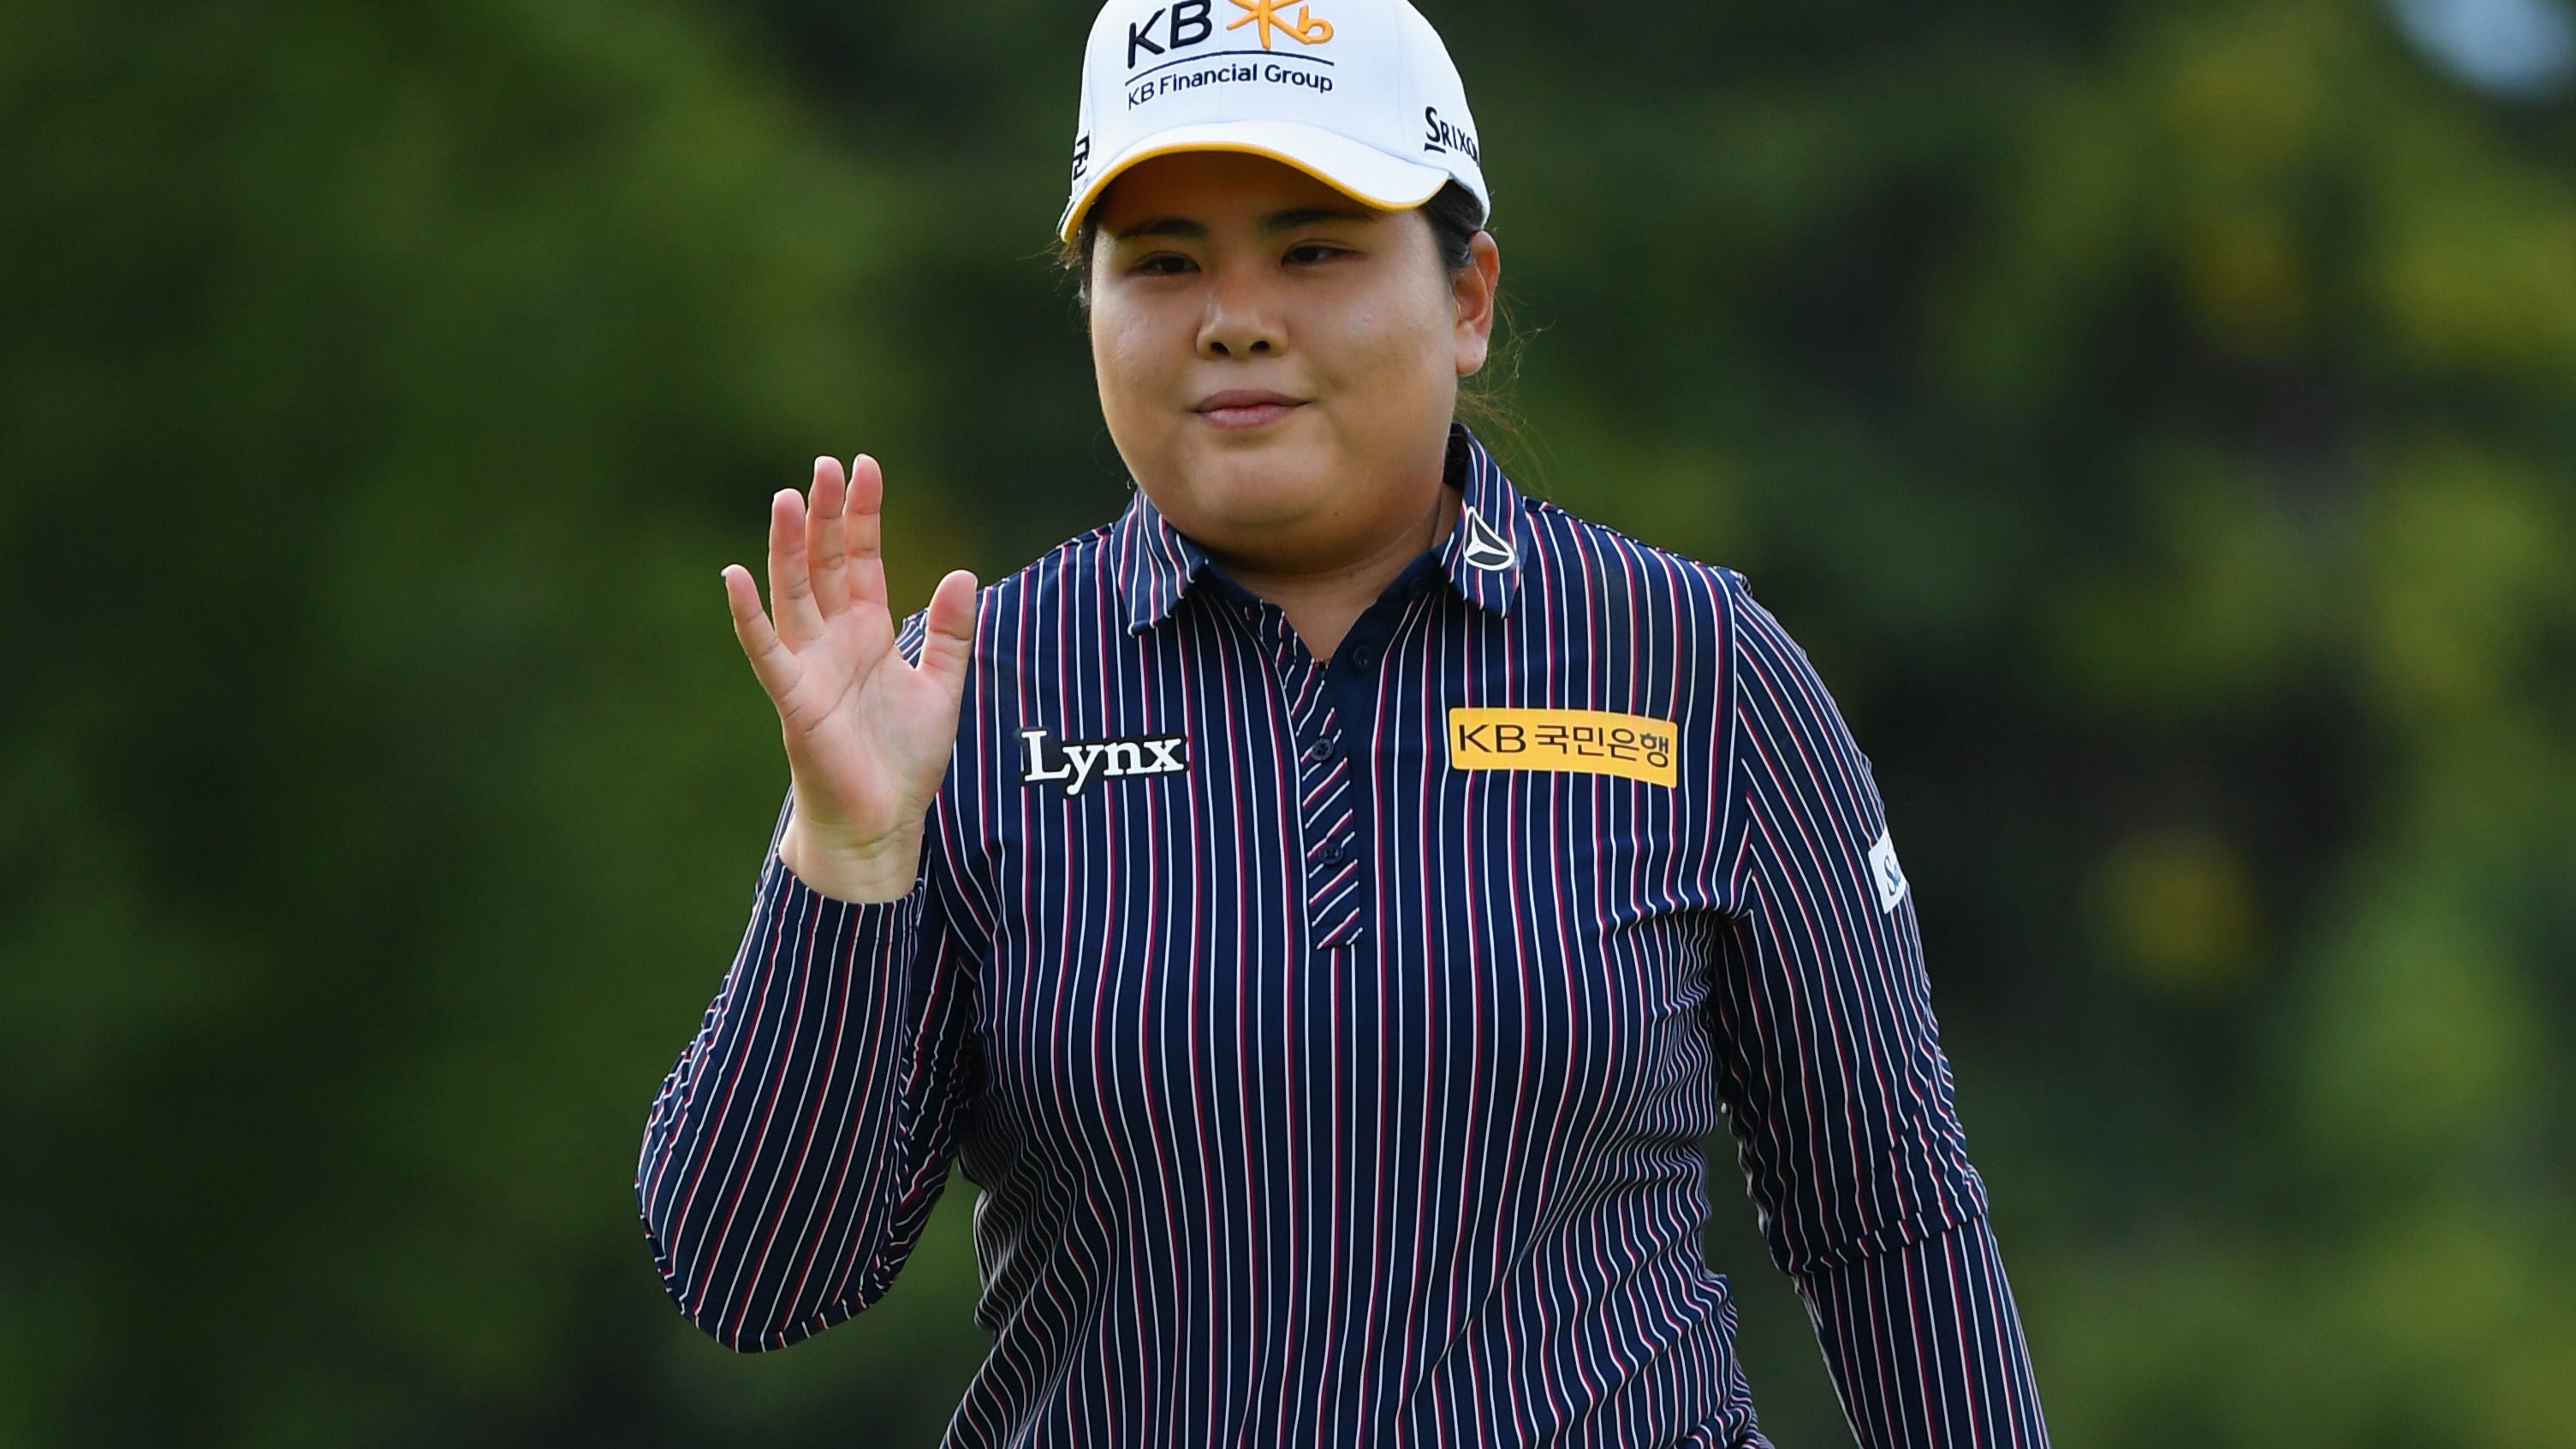 Olympic golf: Inbee Park ramps up schedule to make South Korean team